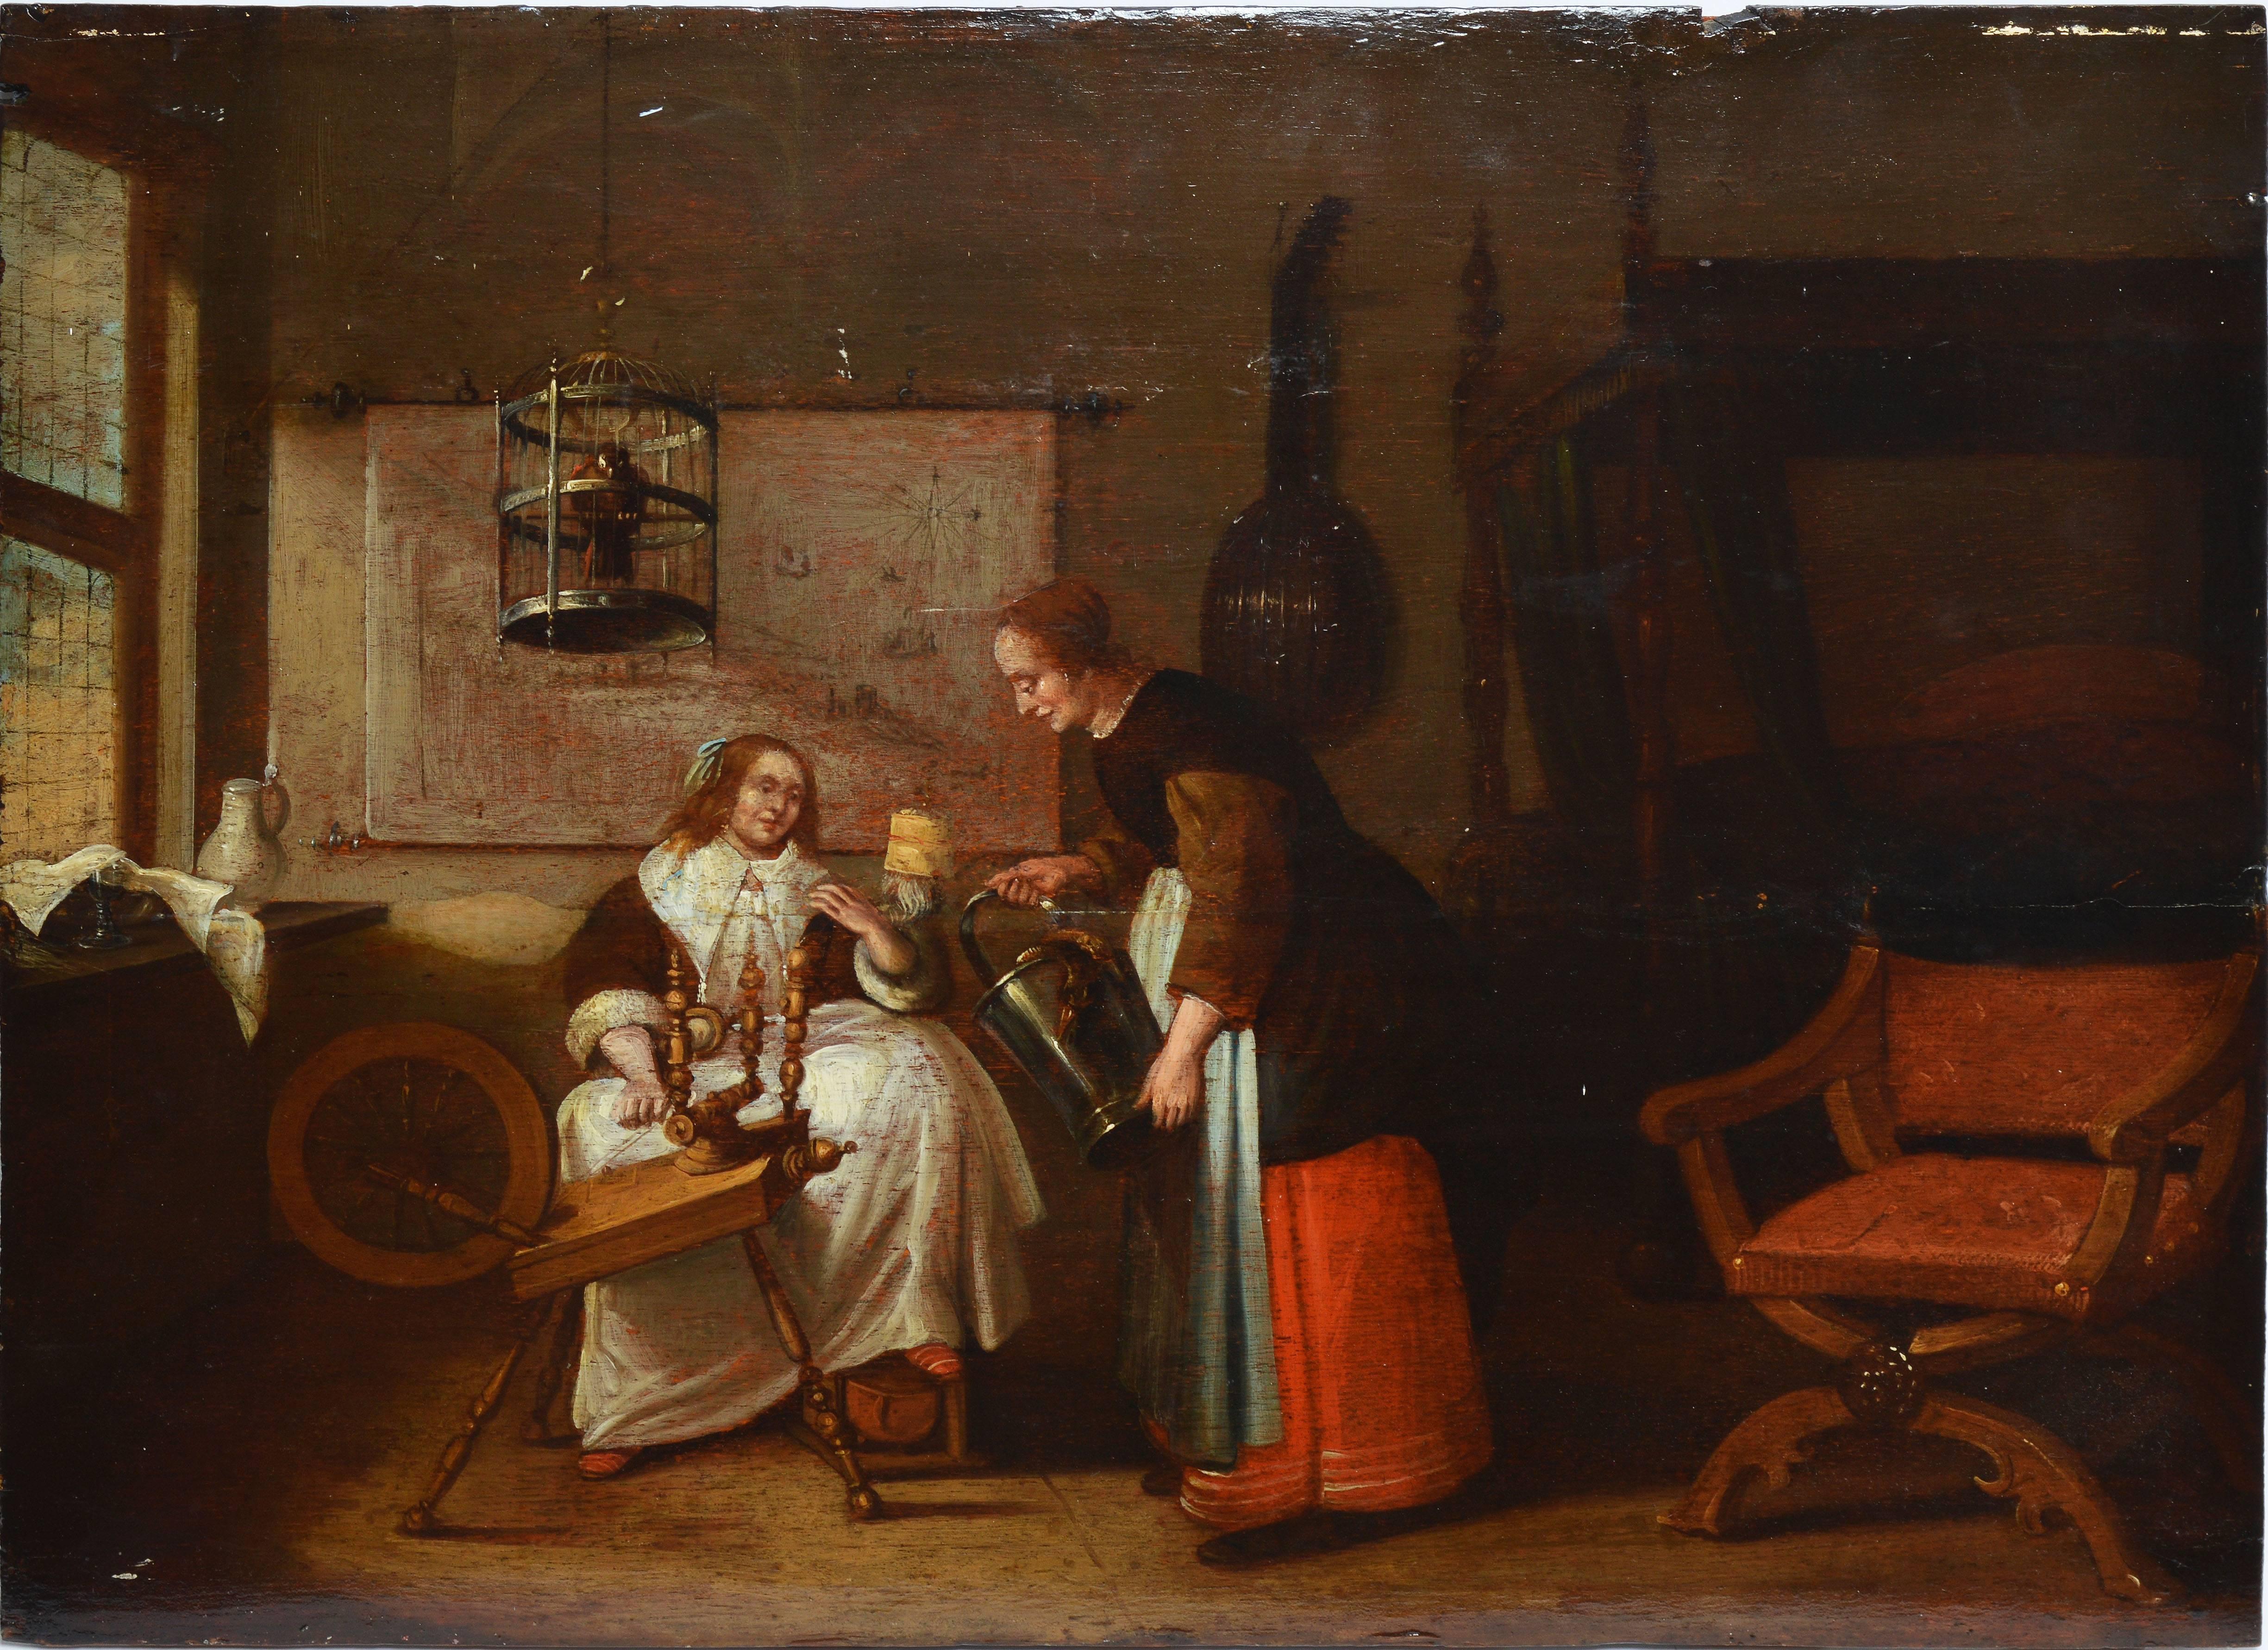 Unknown Figurative Painting - Old Master Interior View with Figures and a Birdcage